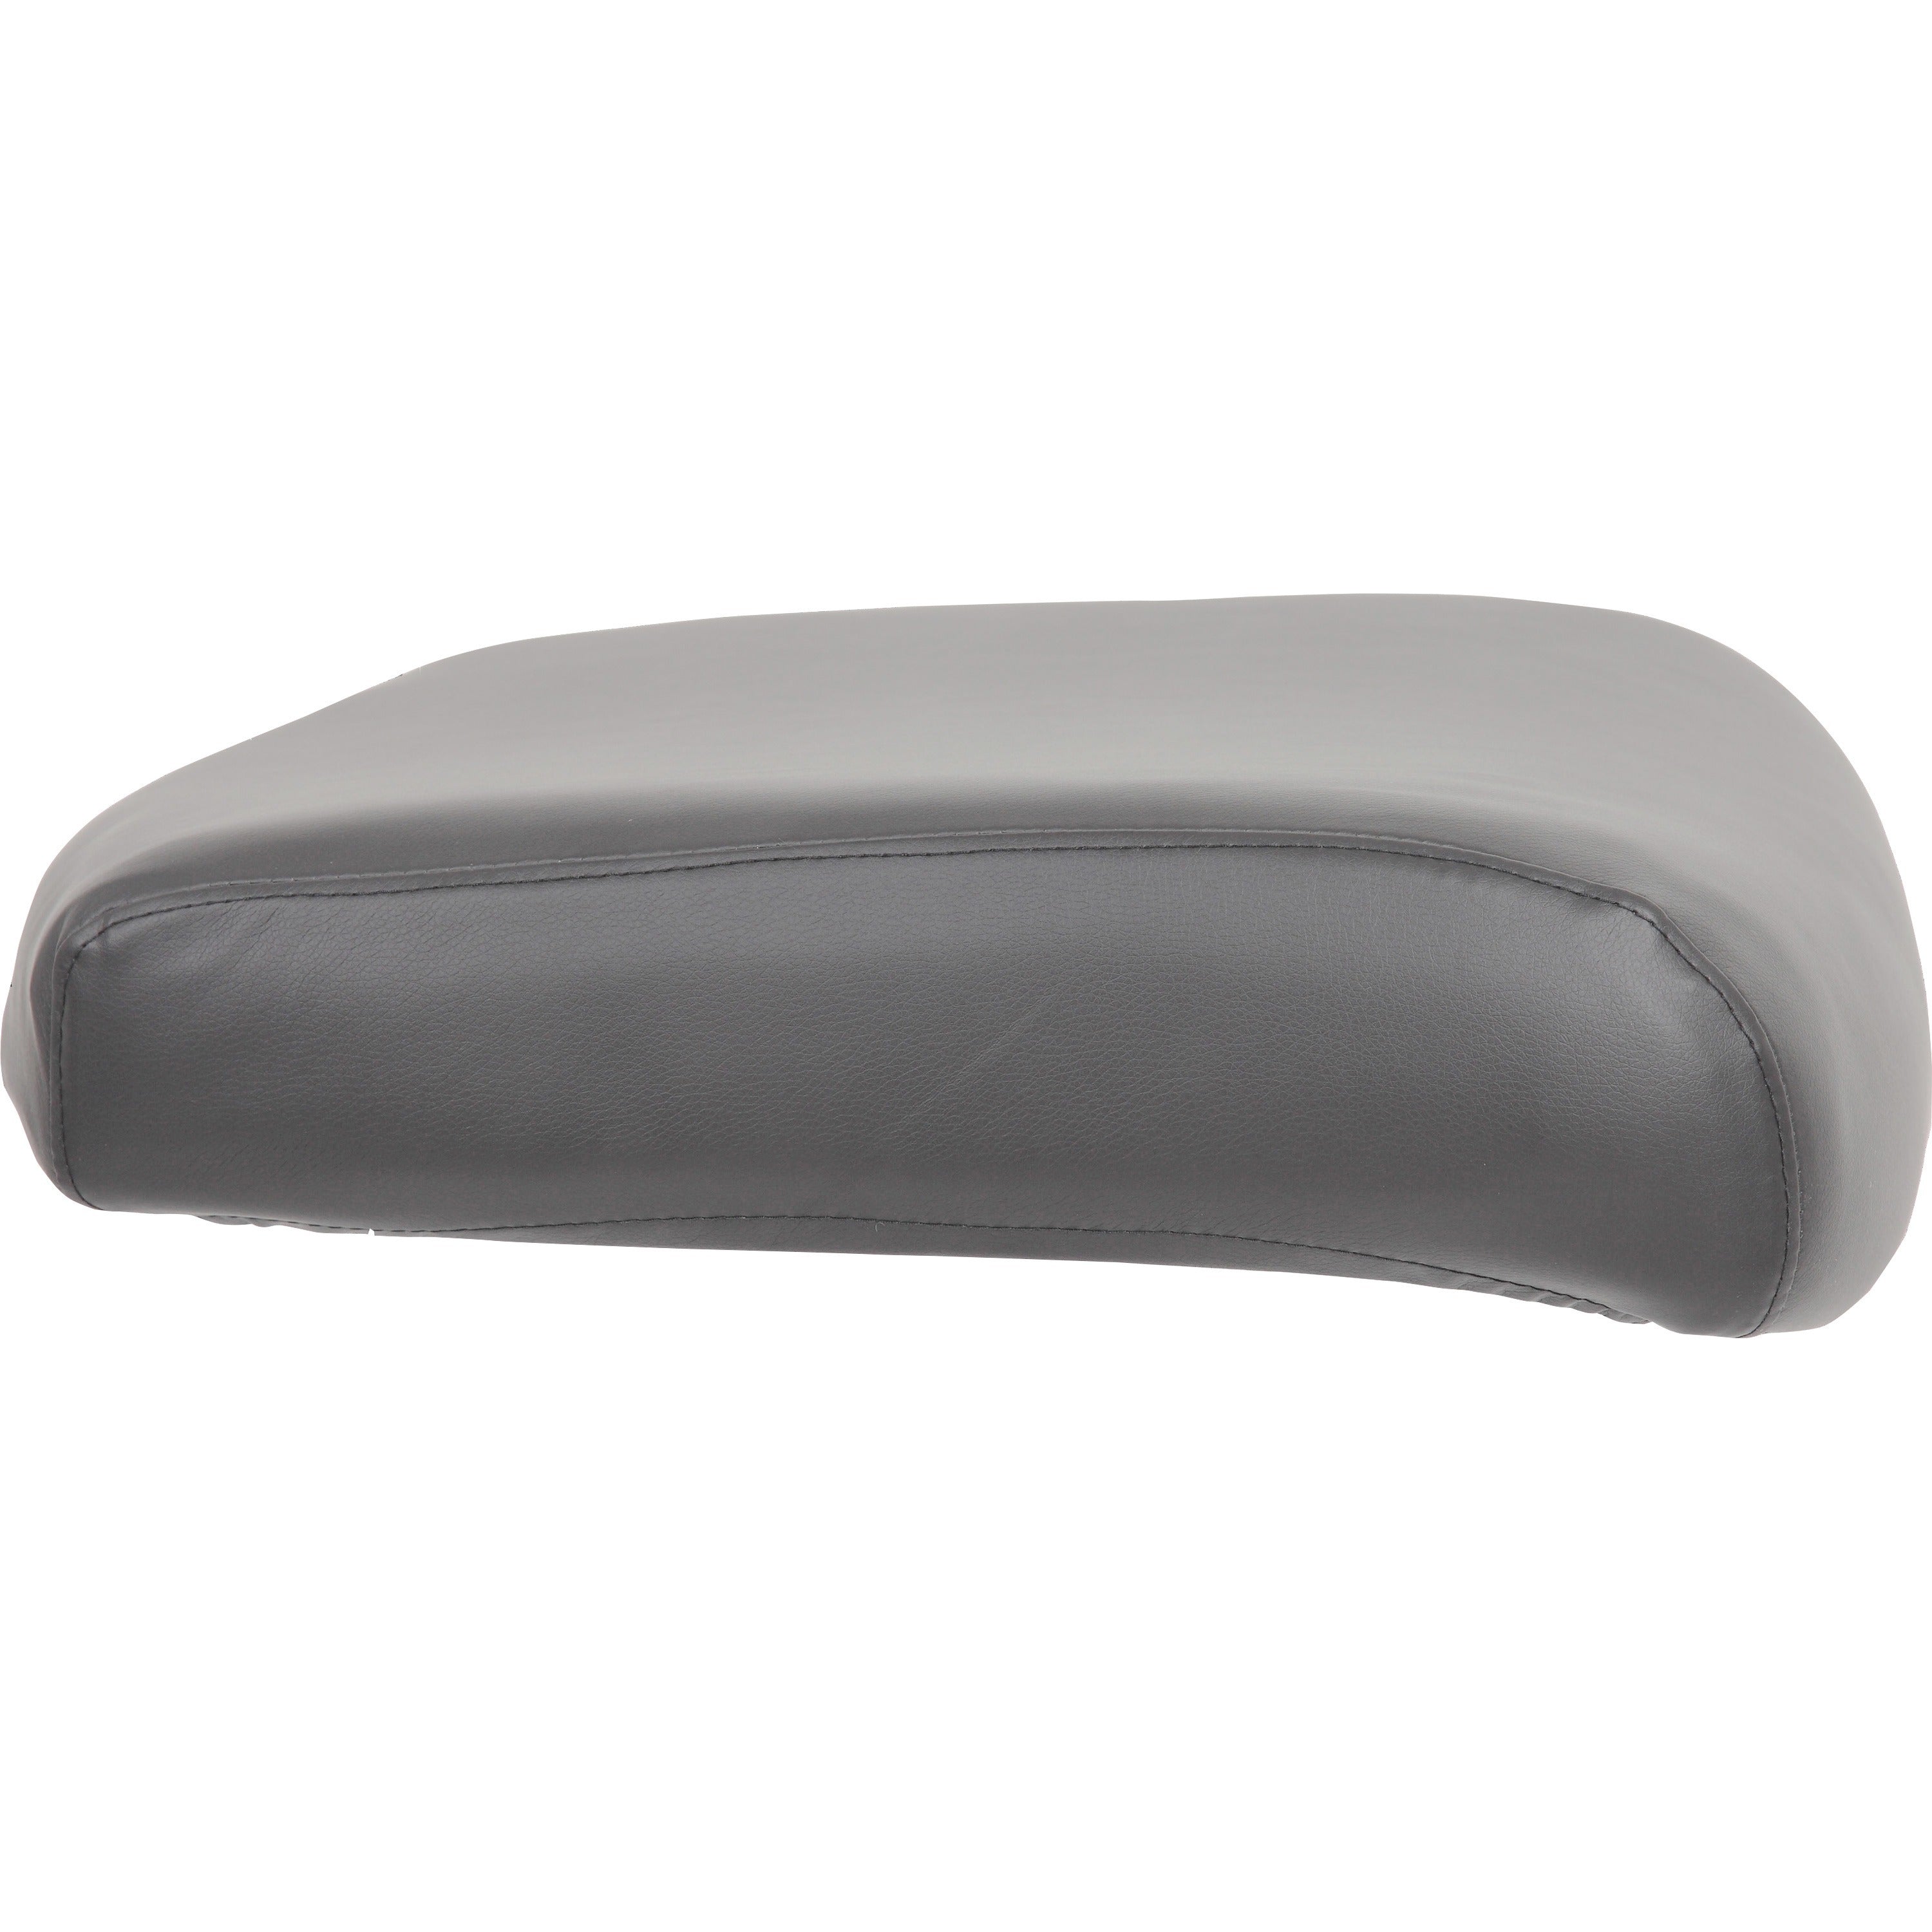 Lorell Antimicrobial Seat Cover - 19" Length x 19" Width - Polyester - Gray - 1 Each - 1